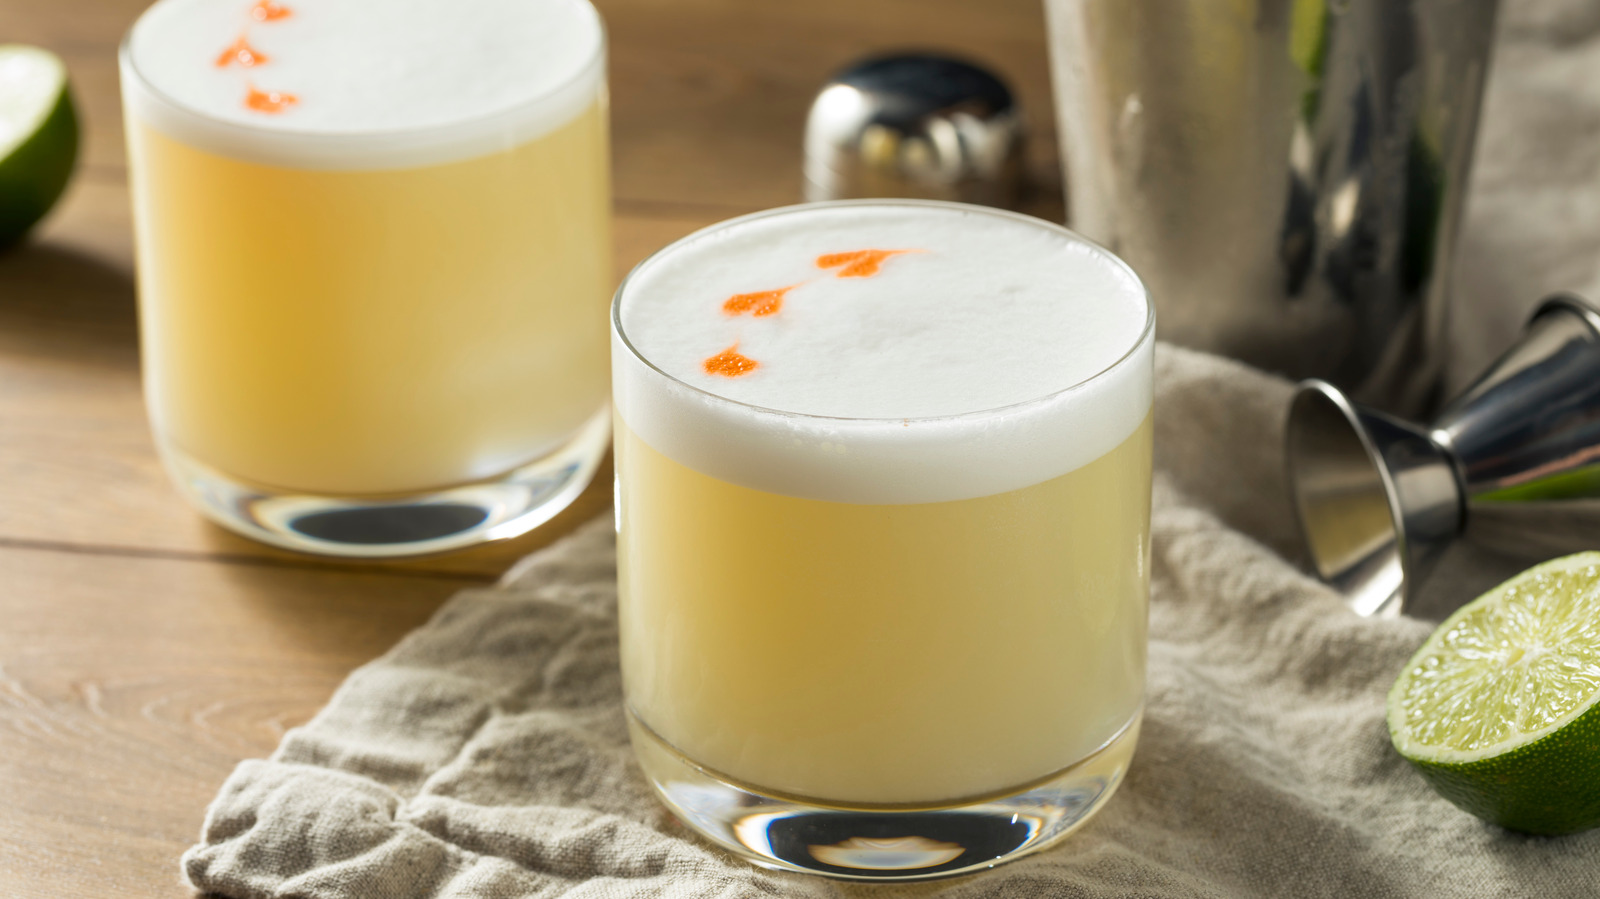 https://www.tastingtable.com/img/gallery/the-best-way-to-foam-egg-whites-for-your-cocktail/l-intro-1660831538.jpg